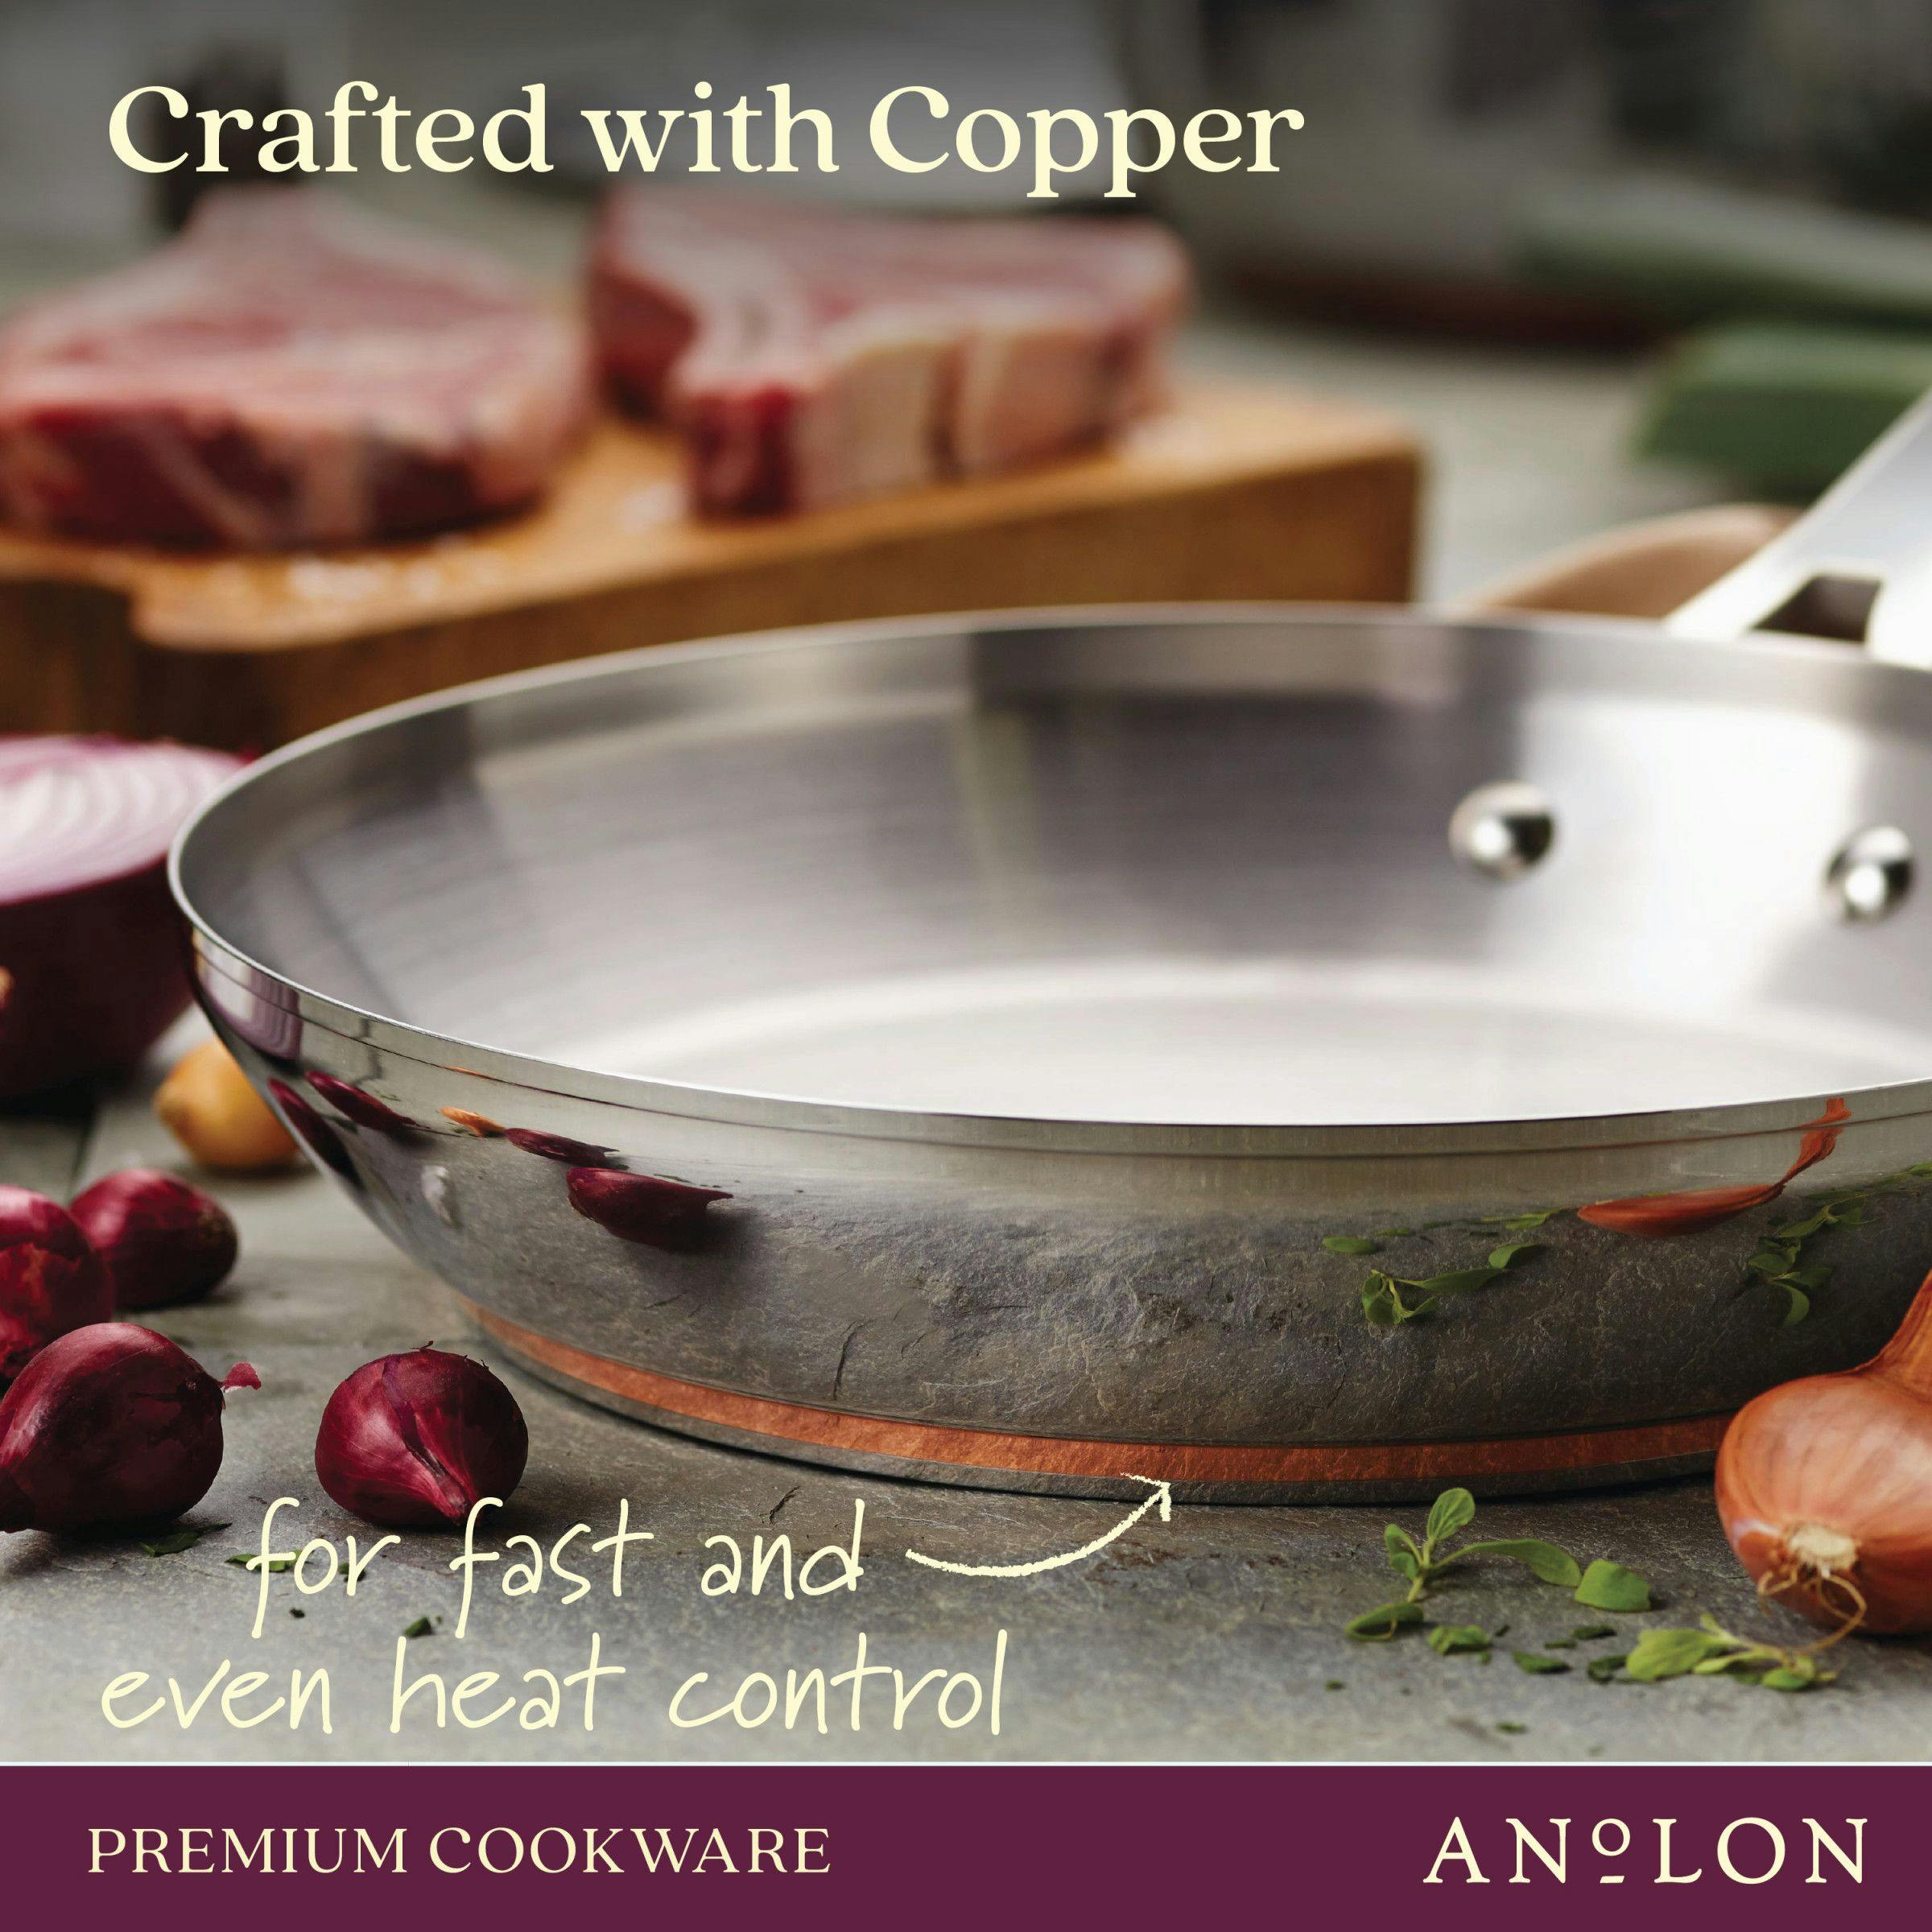 Anolon Nouvelle Copper Stainless Steel Sauteuse and Frying Pan Set, 3-Piece, Silver